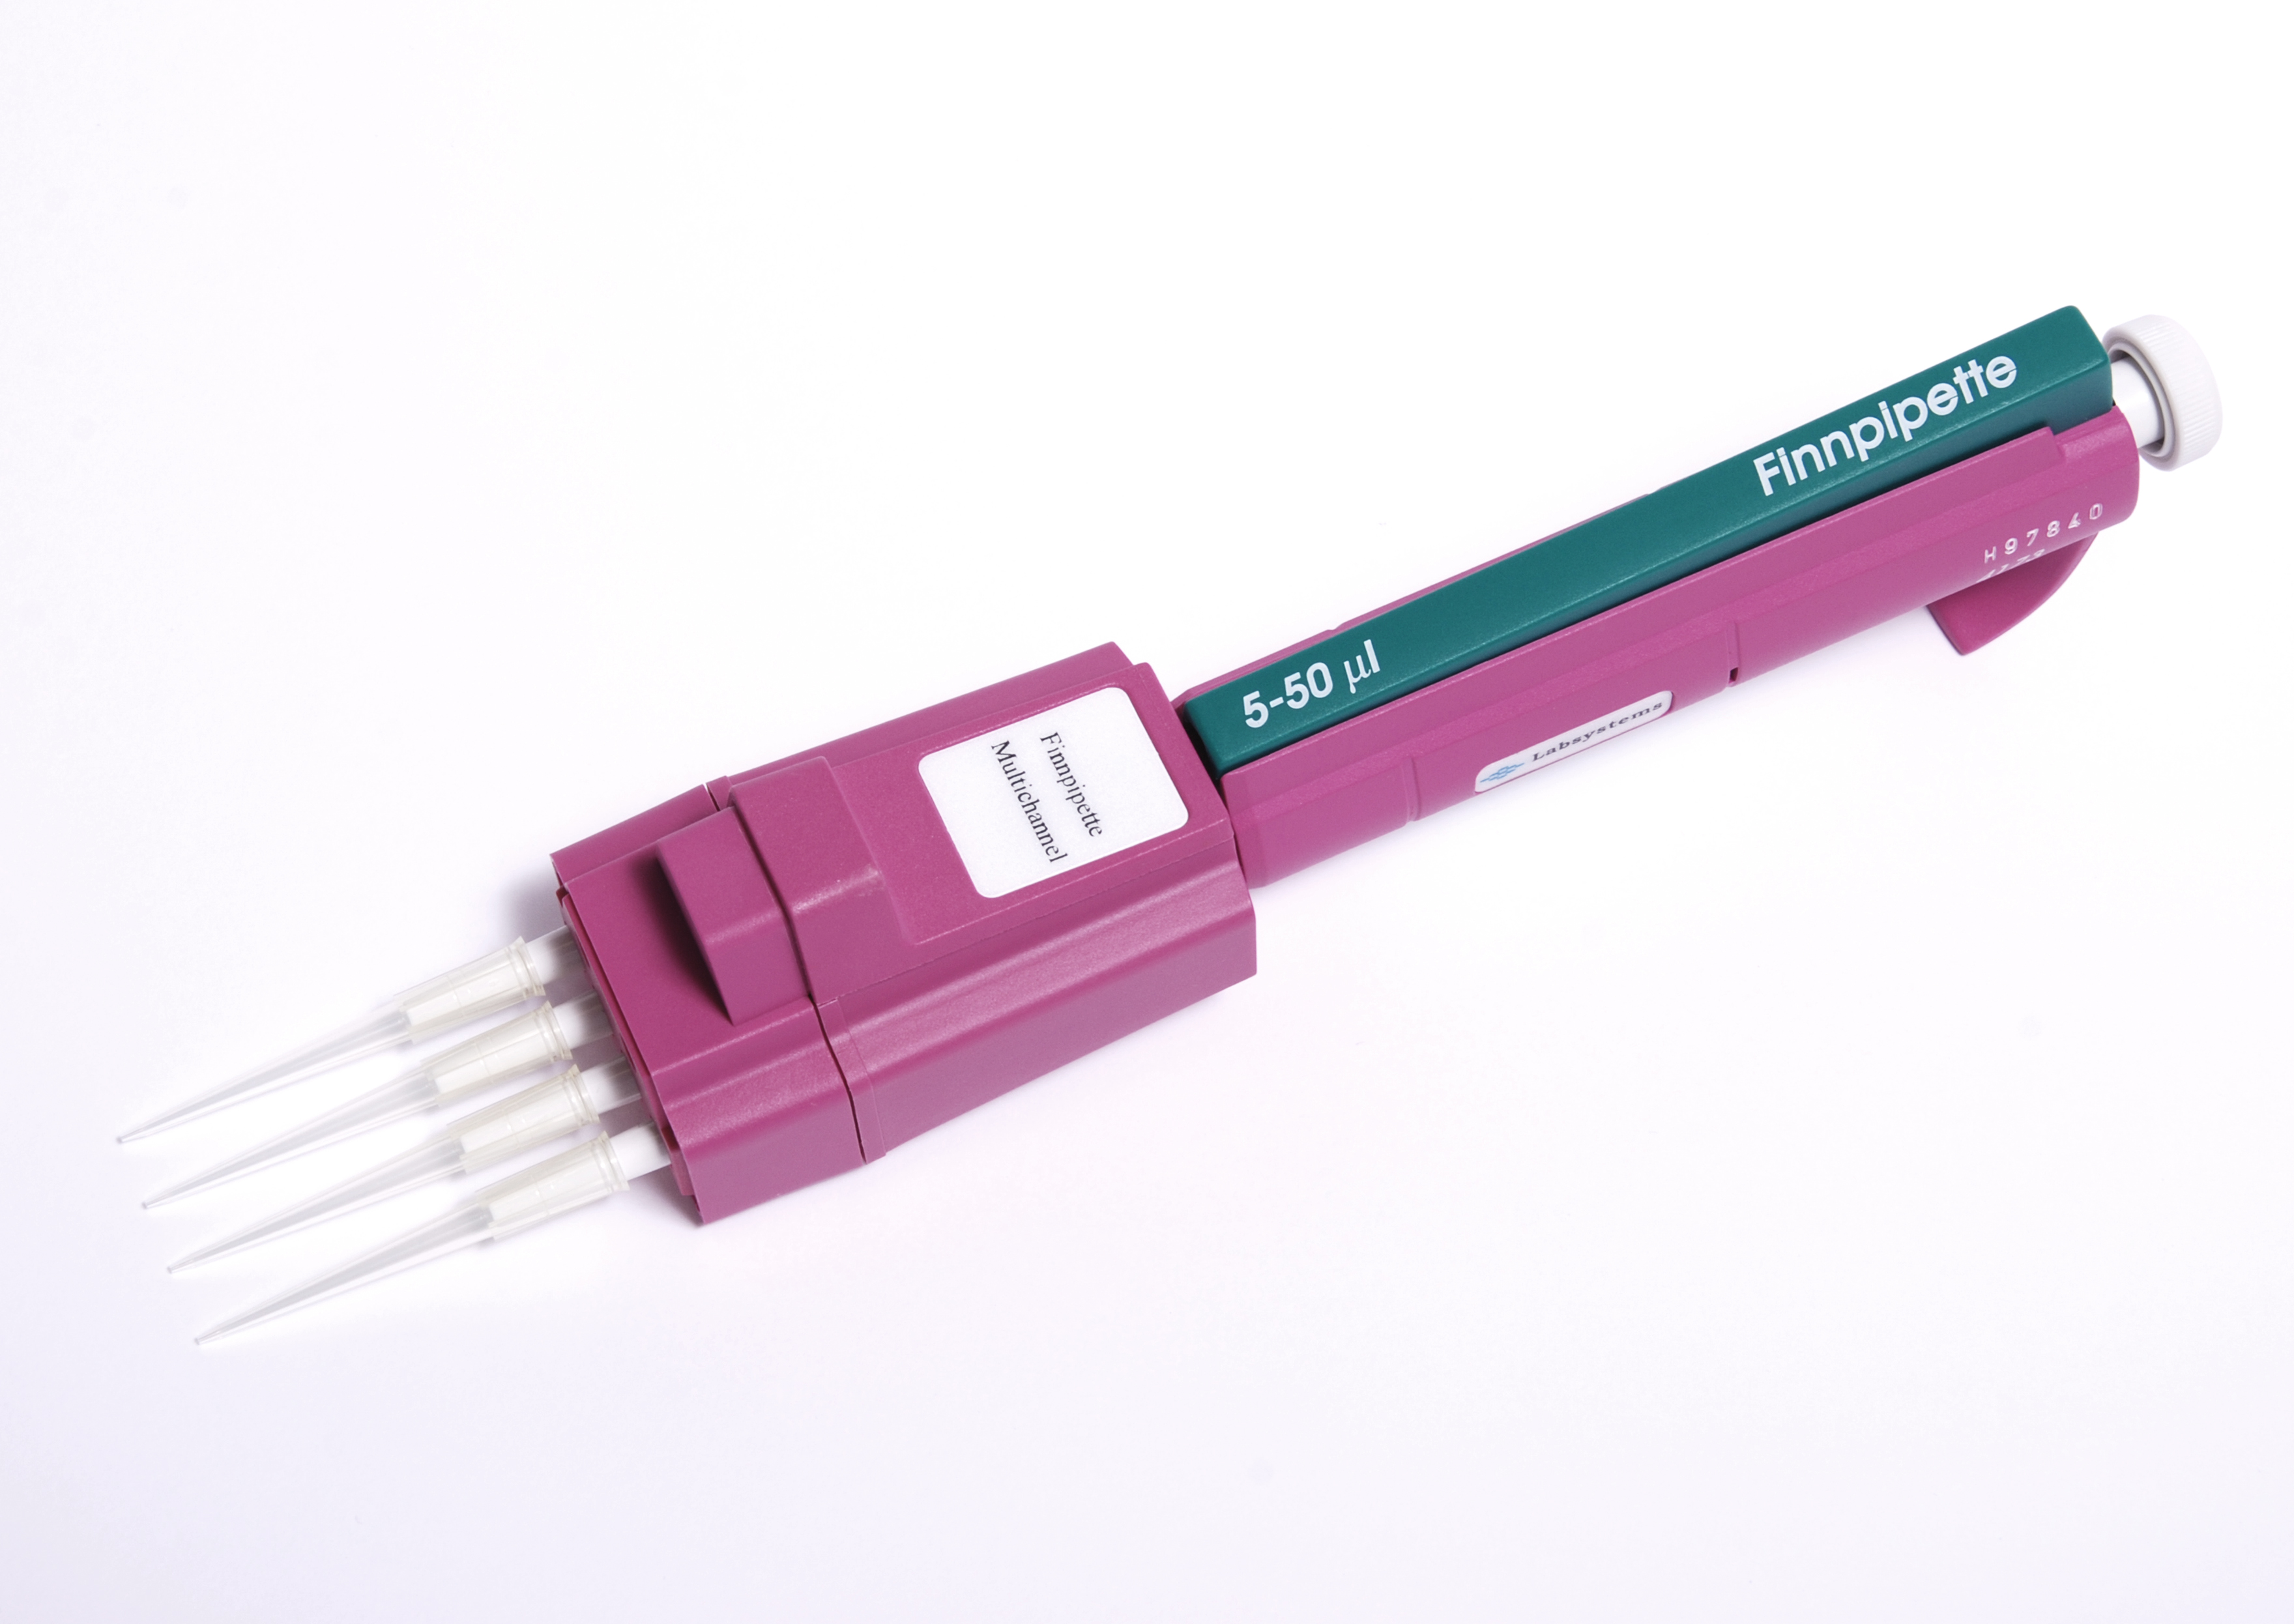 Four-channel pipette with tips